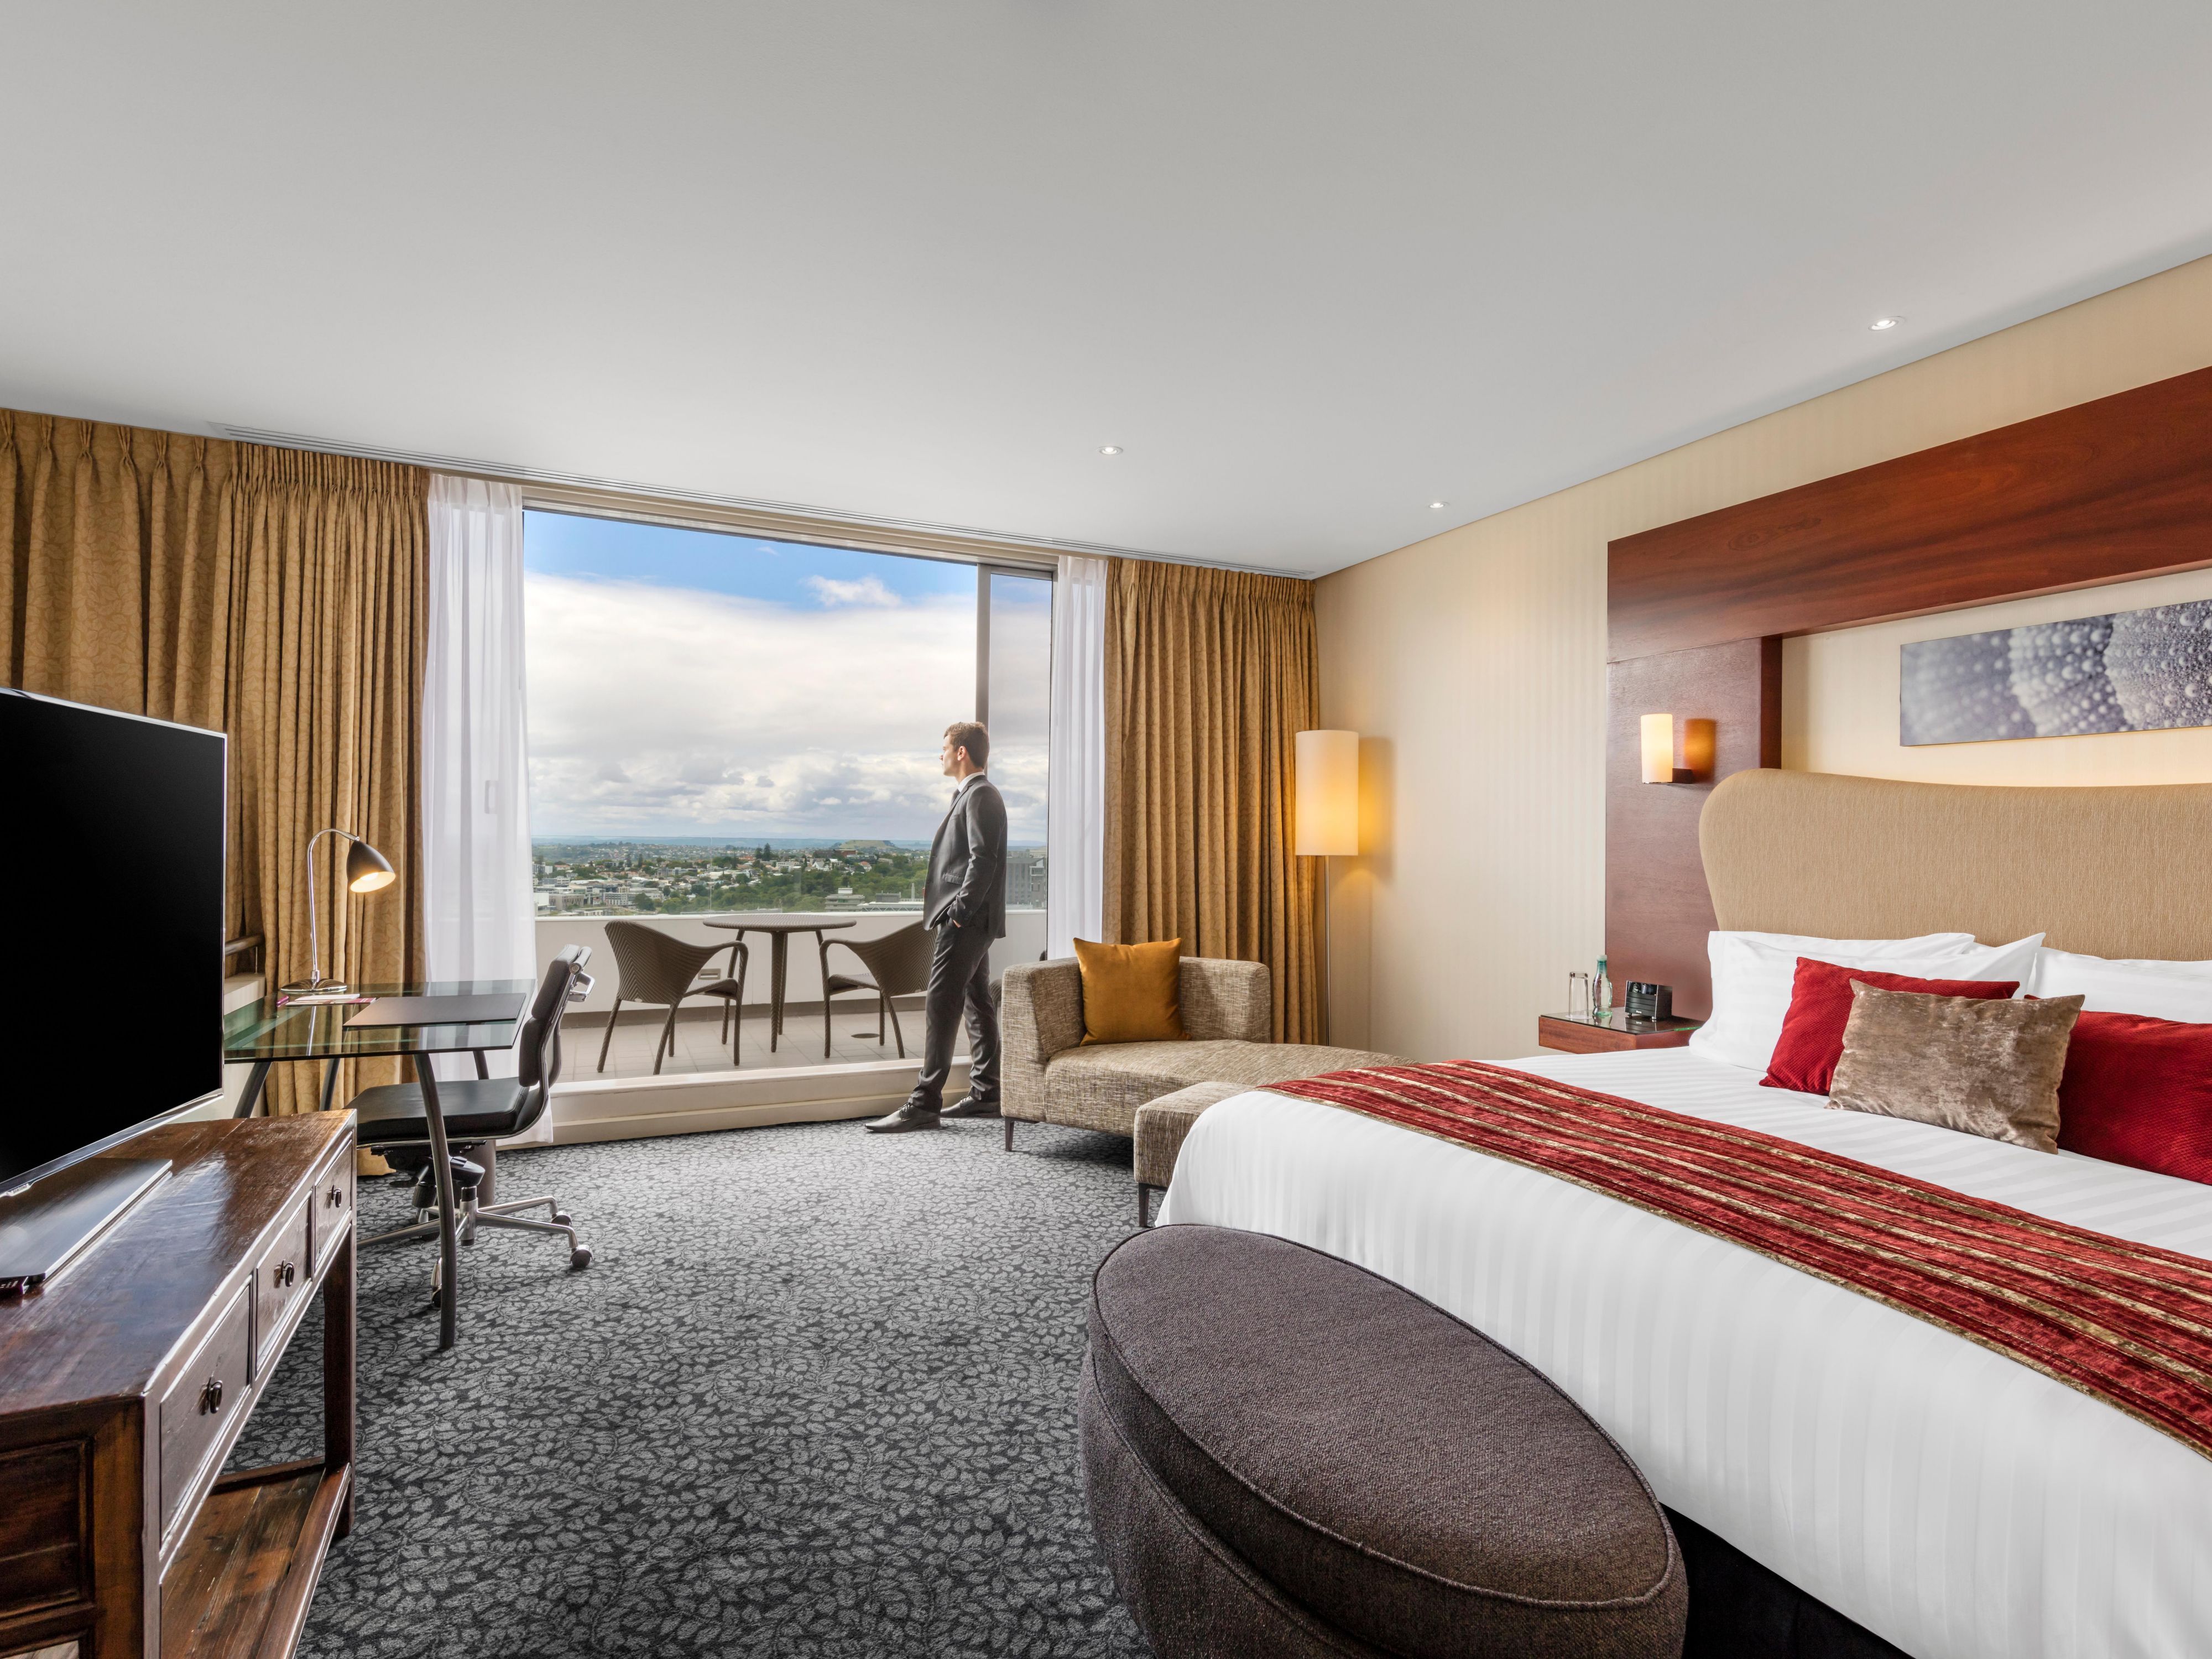 Upgrade Your Stay With 3000 Points